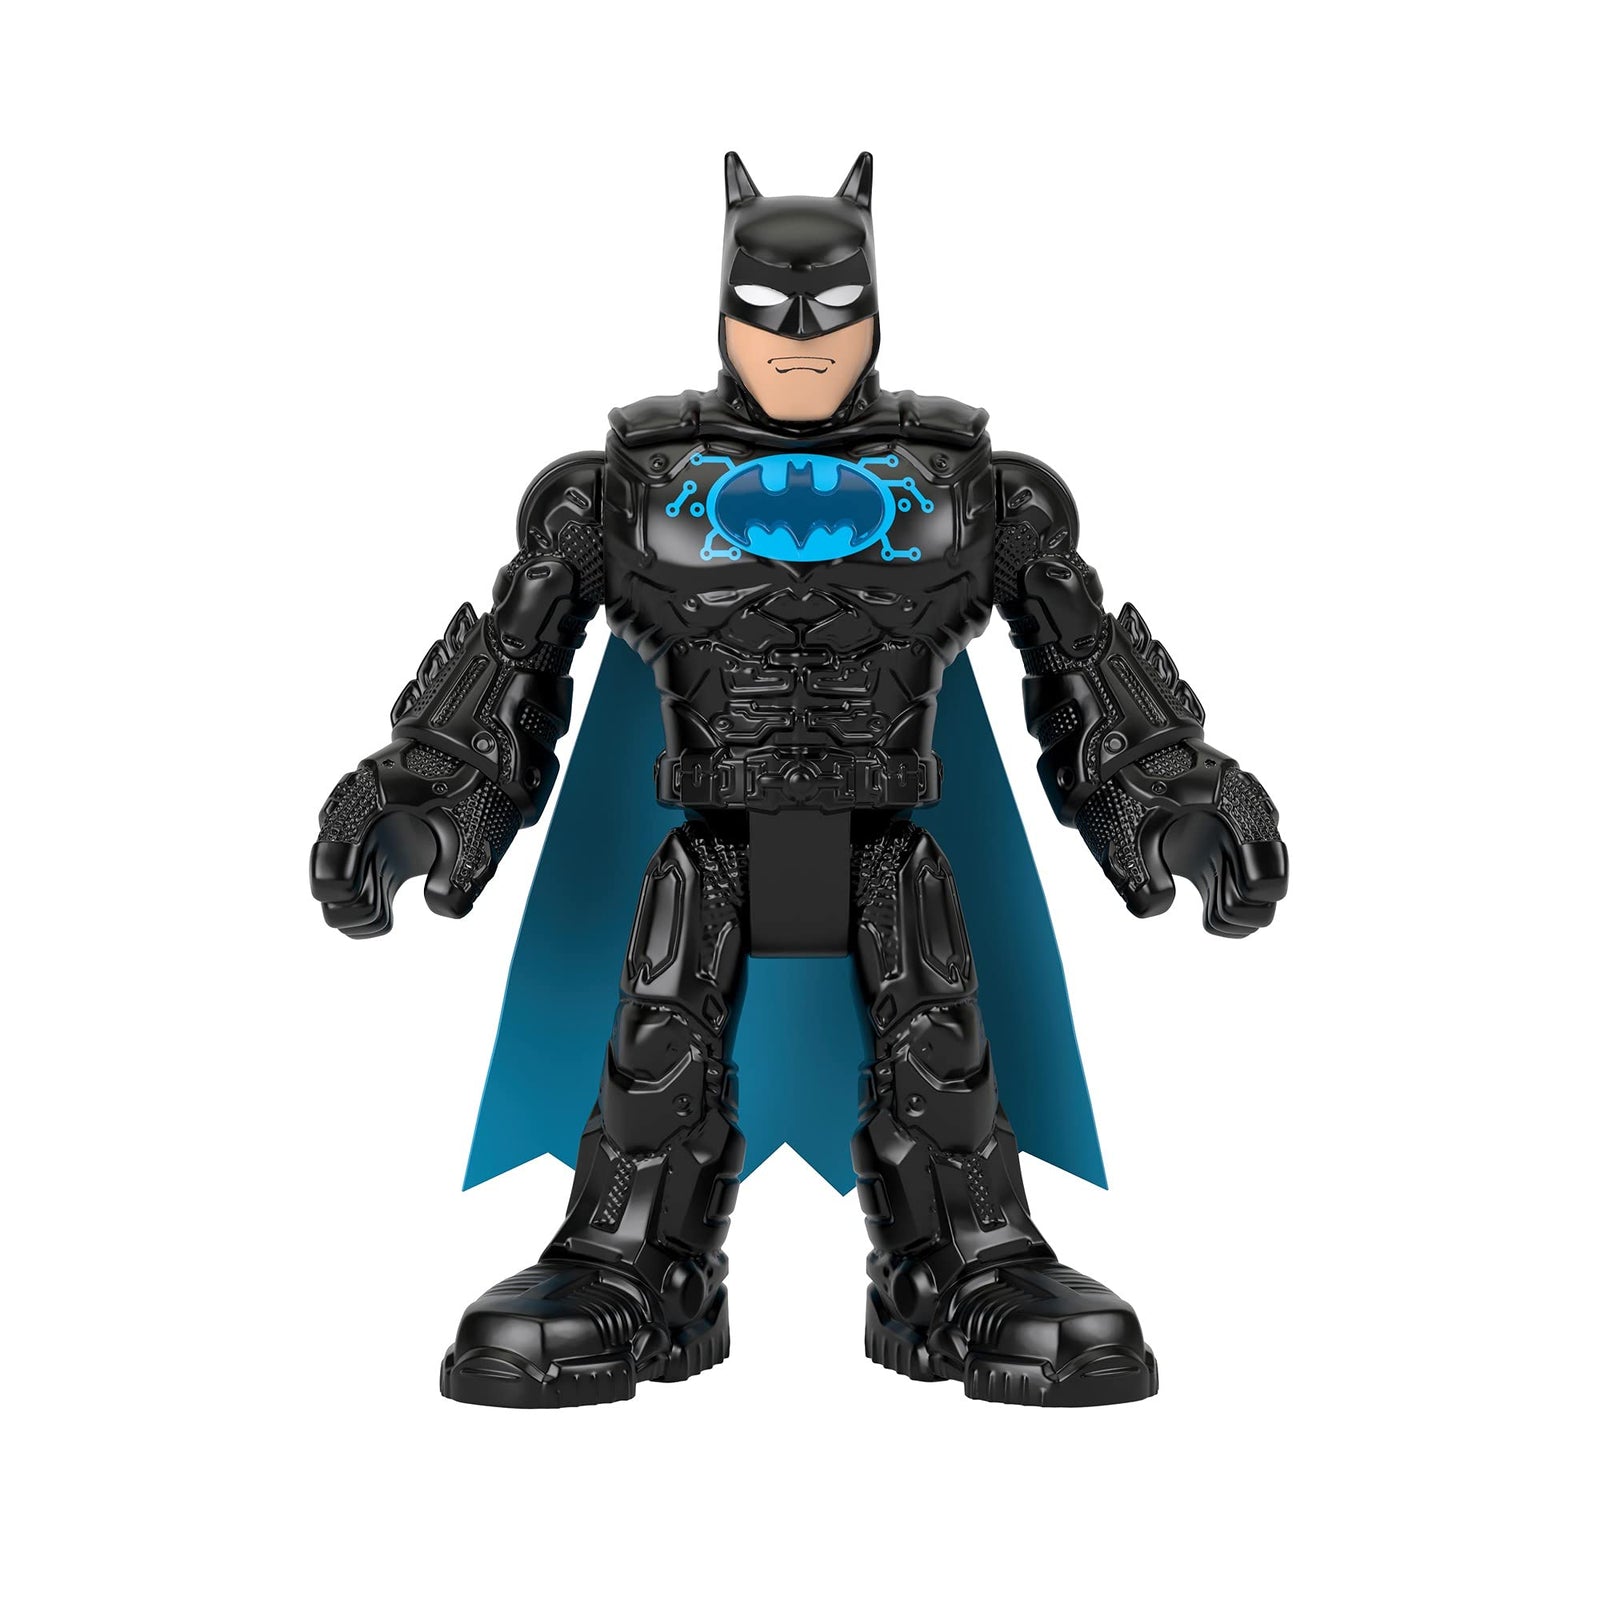 Fisher-Price Imaginext DC Super Friends Bat-Tech Batbot, Transforming 2-in-1 Batman Robot and Playset with Lights and Sounds for Kids Ages 3-8